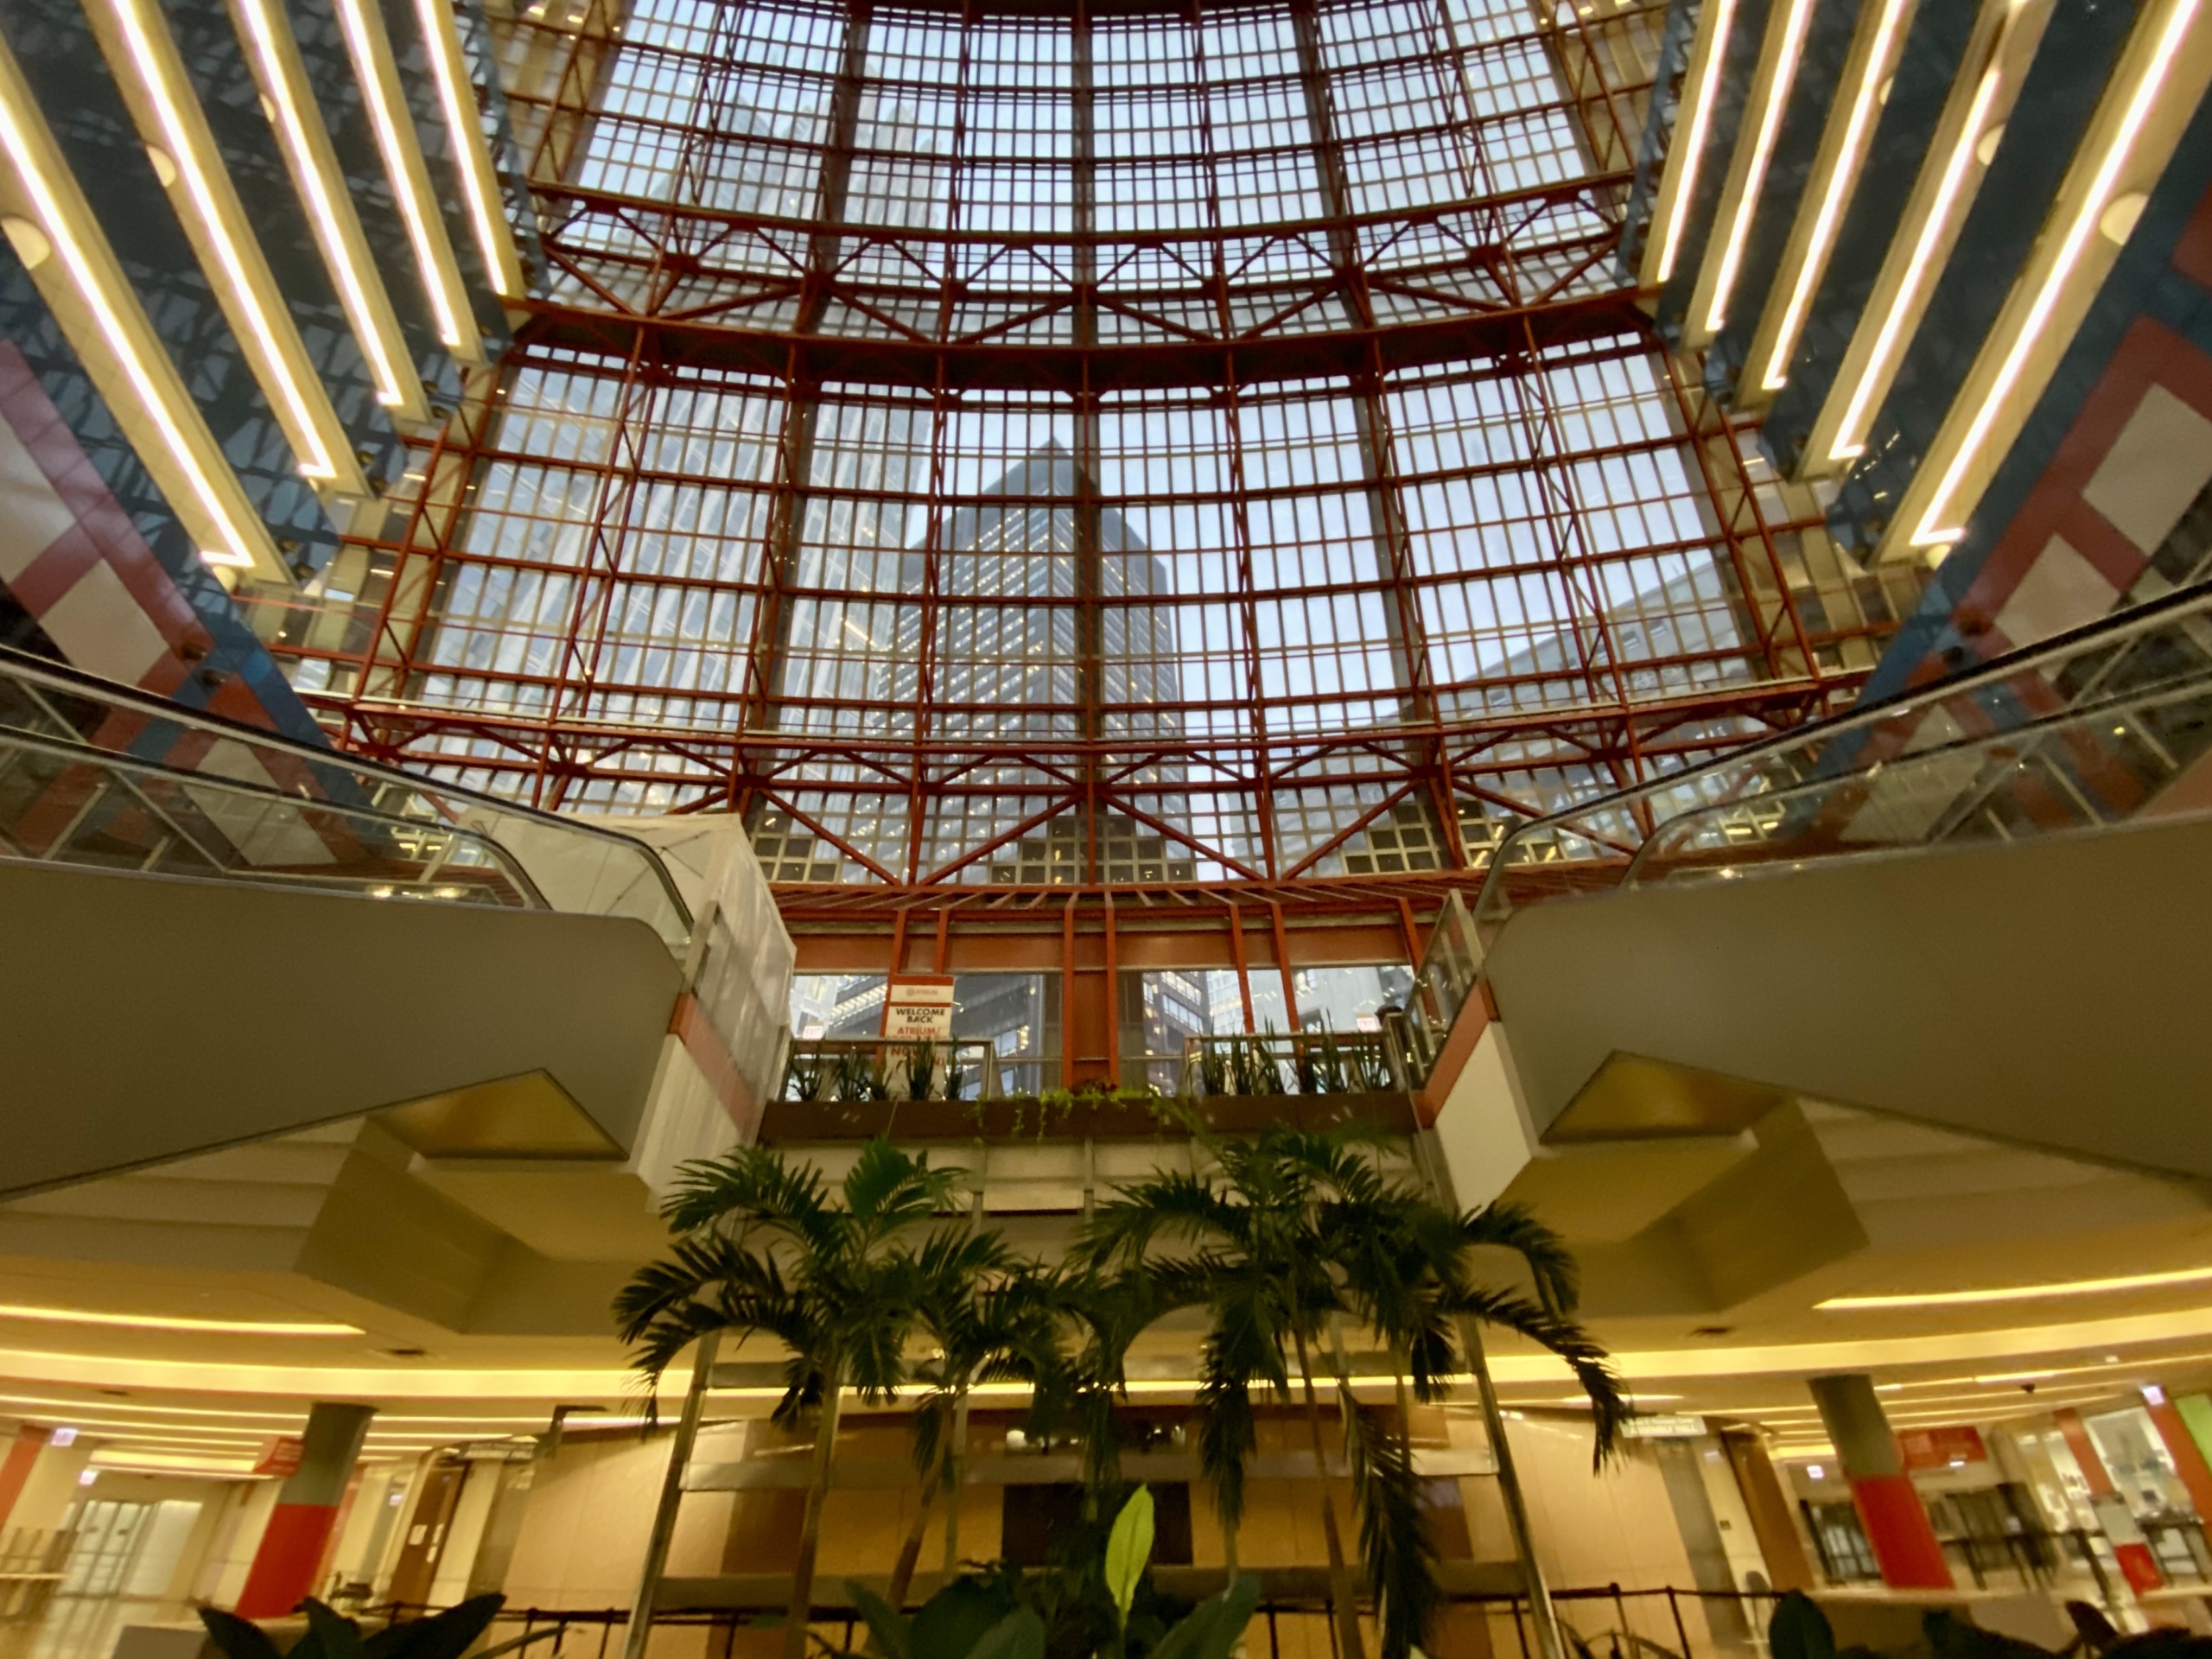 Pedway level of state of Illinois center. Two palm trees between two elevators with camera pointed towards open ceiling inside atrium mall.